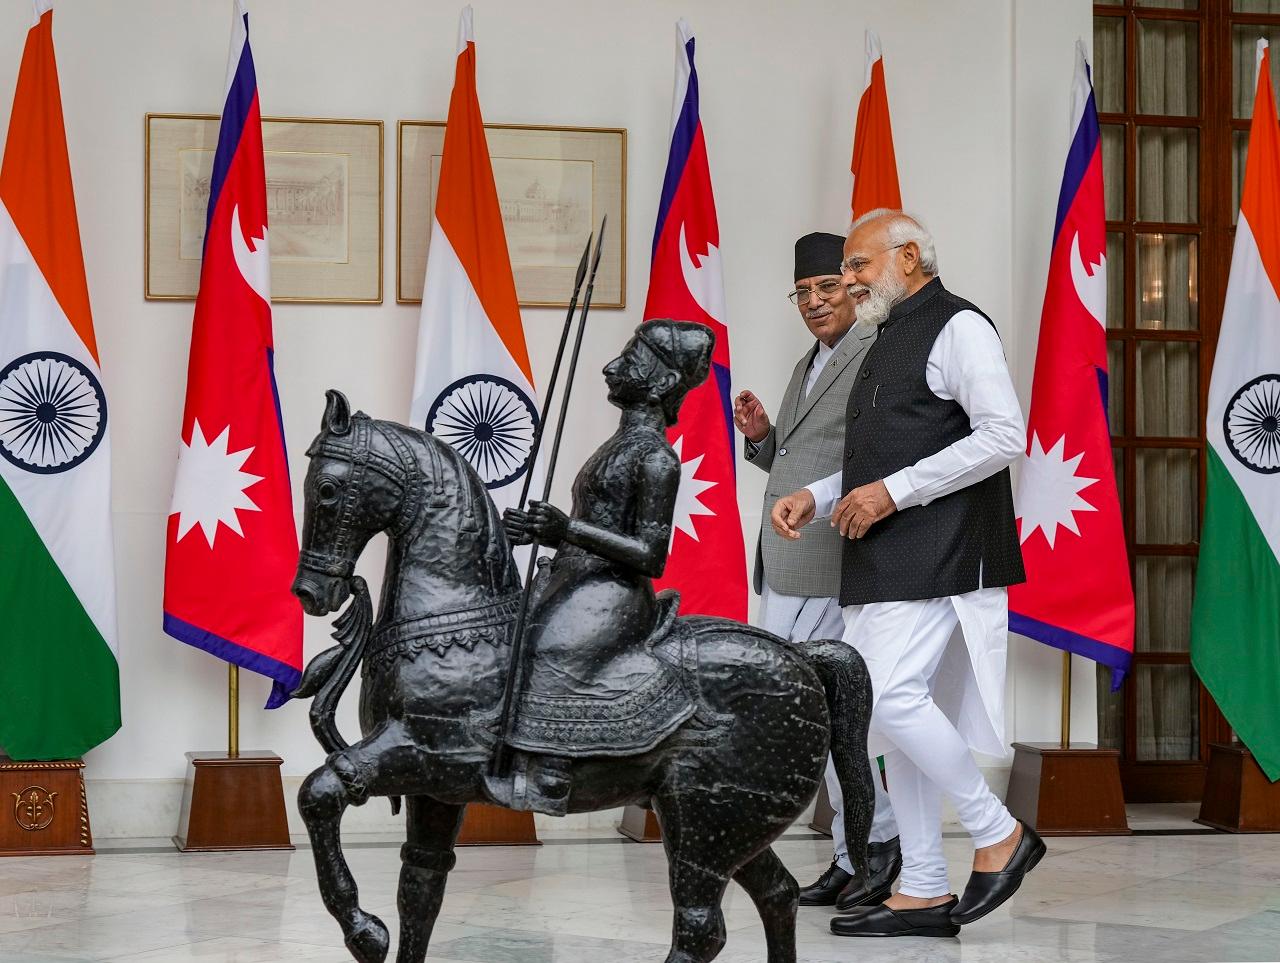 Nepal is important for India in the context of its overall strategic interests in the region, and the leaders of the two countries have often noted the age-old 